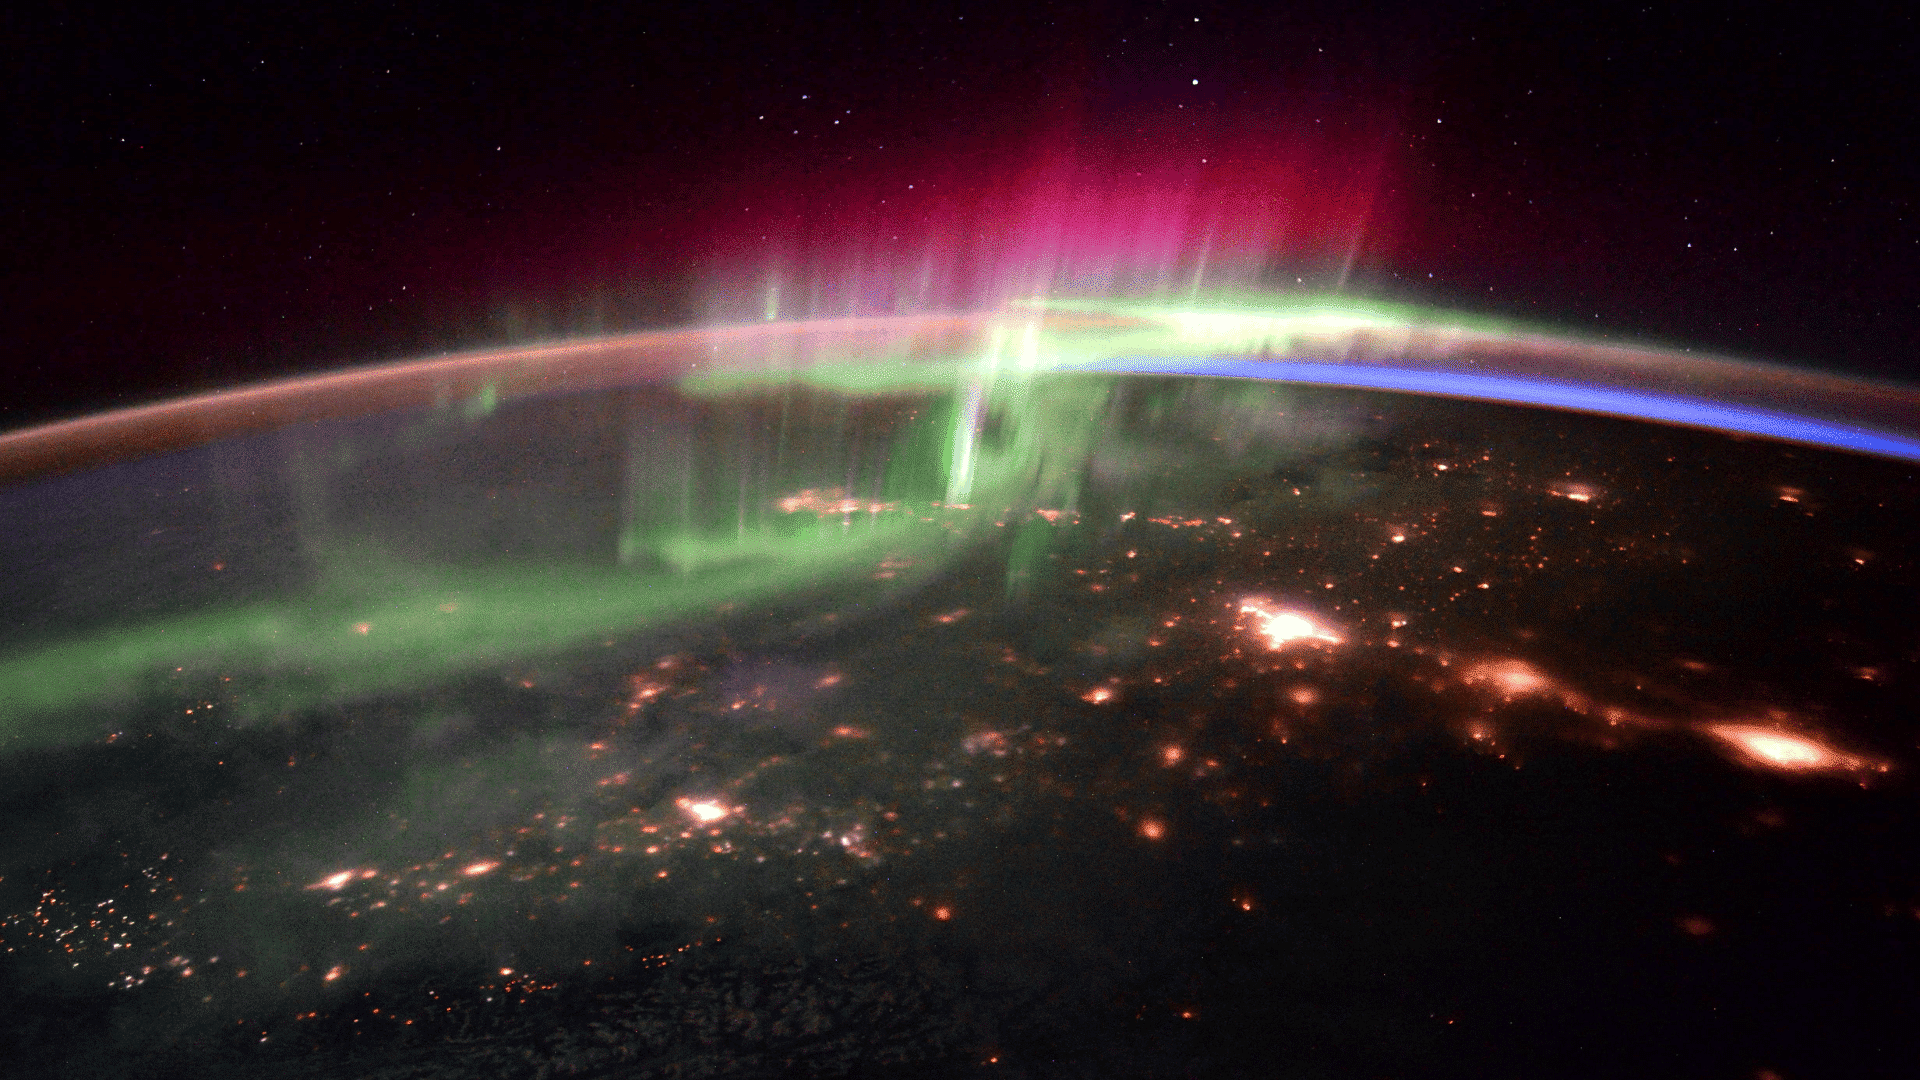 Interplay between the atmosphere and aurora over the Pacific Northwest captured from the ISS